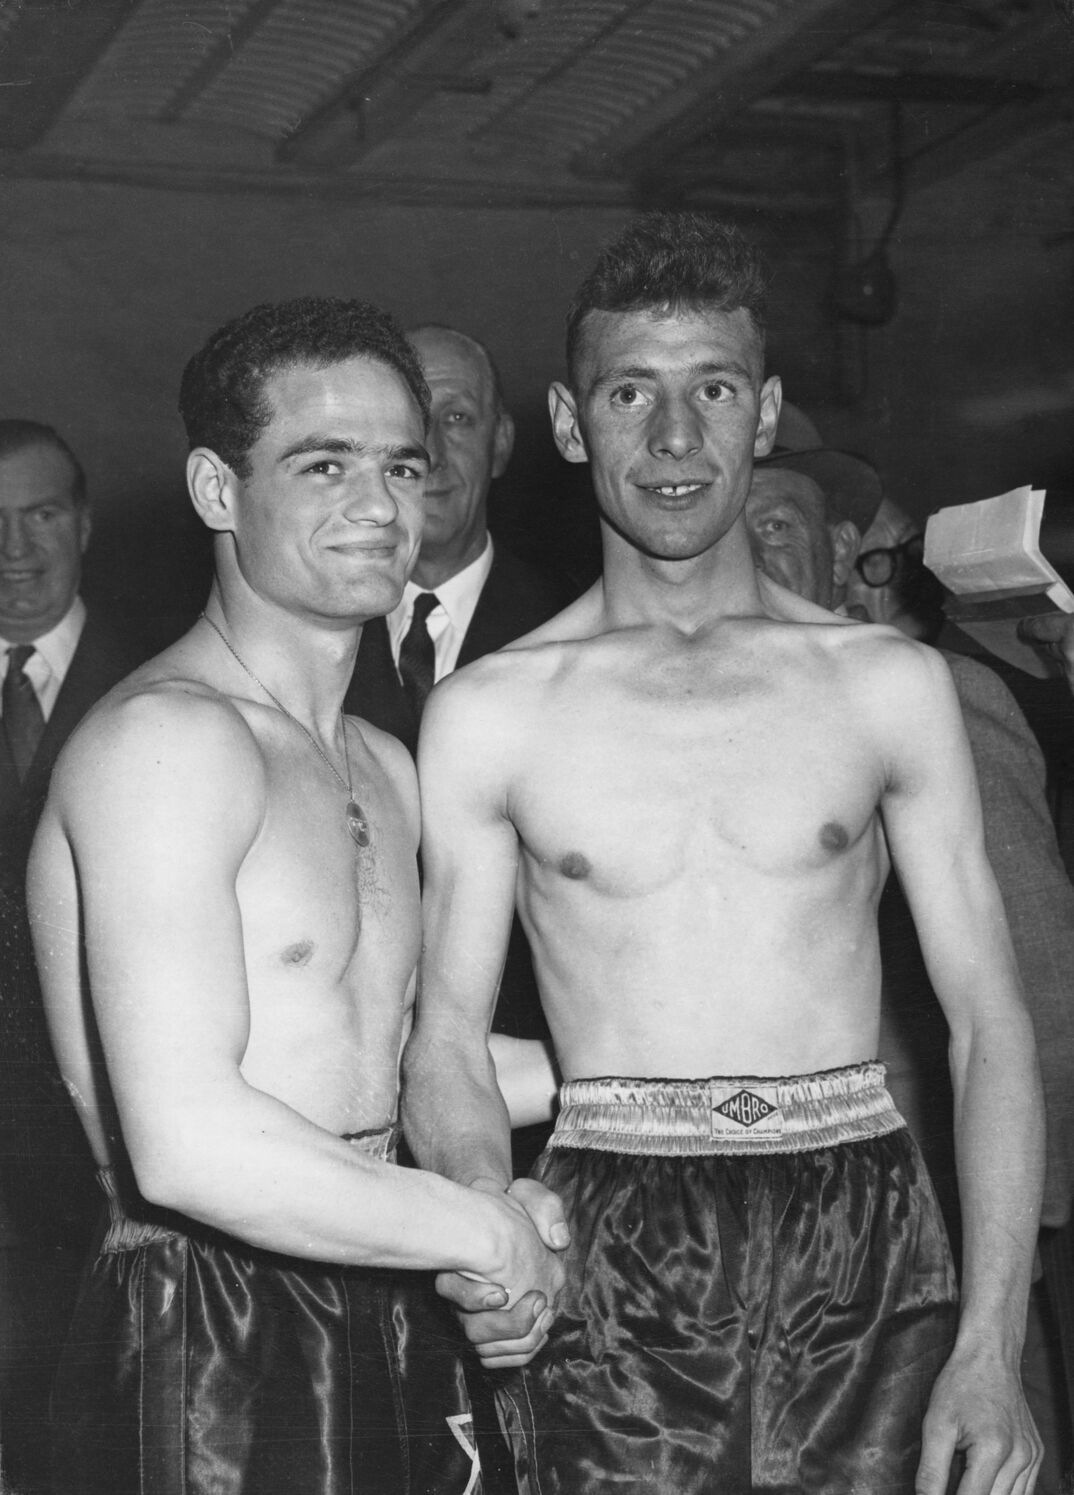 Black-and-white image. Two shirtless wrestlers stand wearing high-waisted gym shorts and shaking hands, smiling for the camera. The man on the left is shorter with dark hair. The taller man to the right has blonde hair and smiles with his teeth. Behind them, an assortment of men in suits watch in interest.